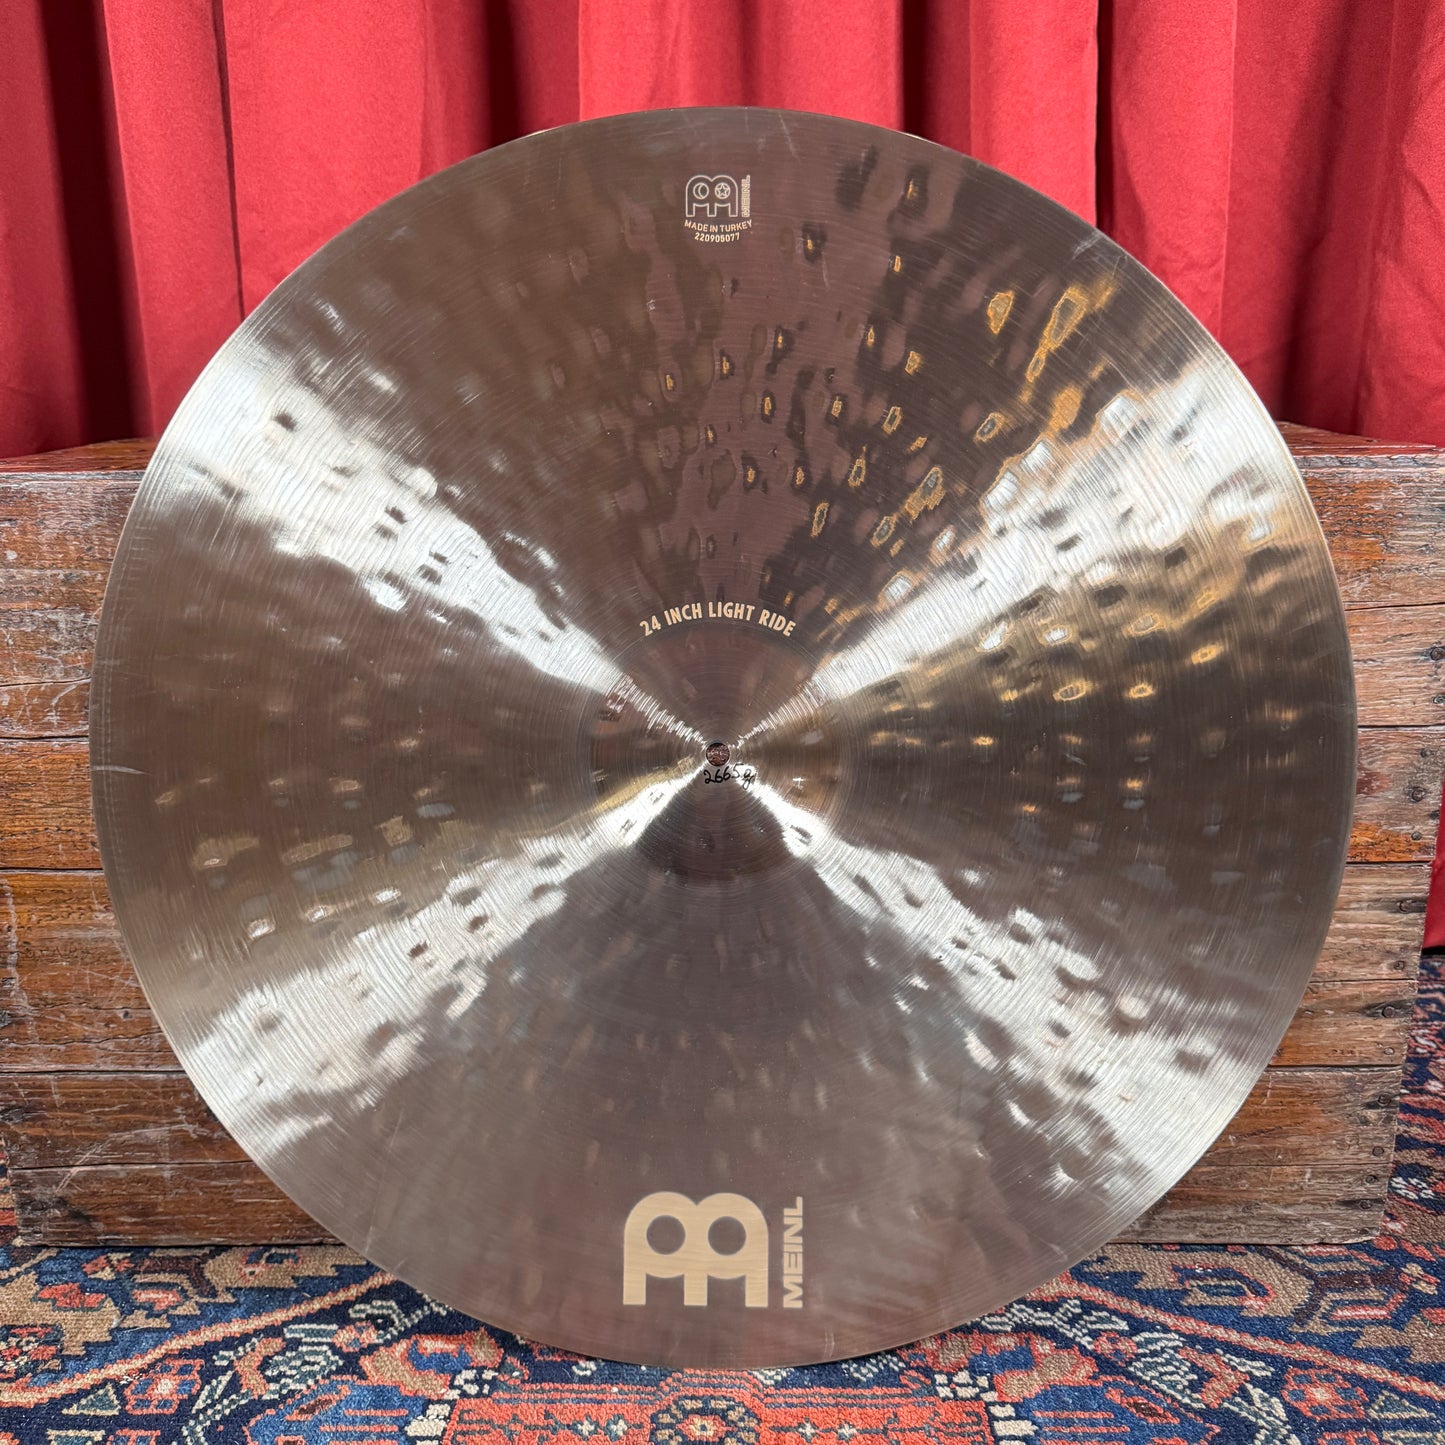 24" Meinl Byzance Foundry Reserve Light Ride Cymbal 2665g *Video Demo*